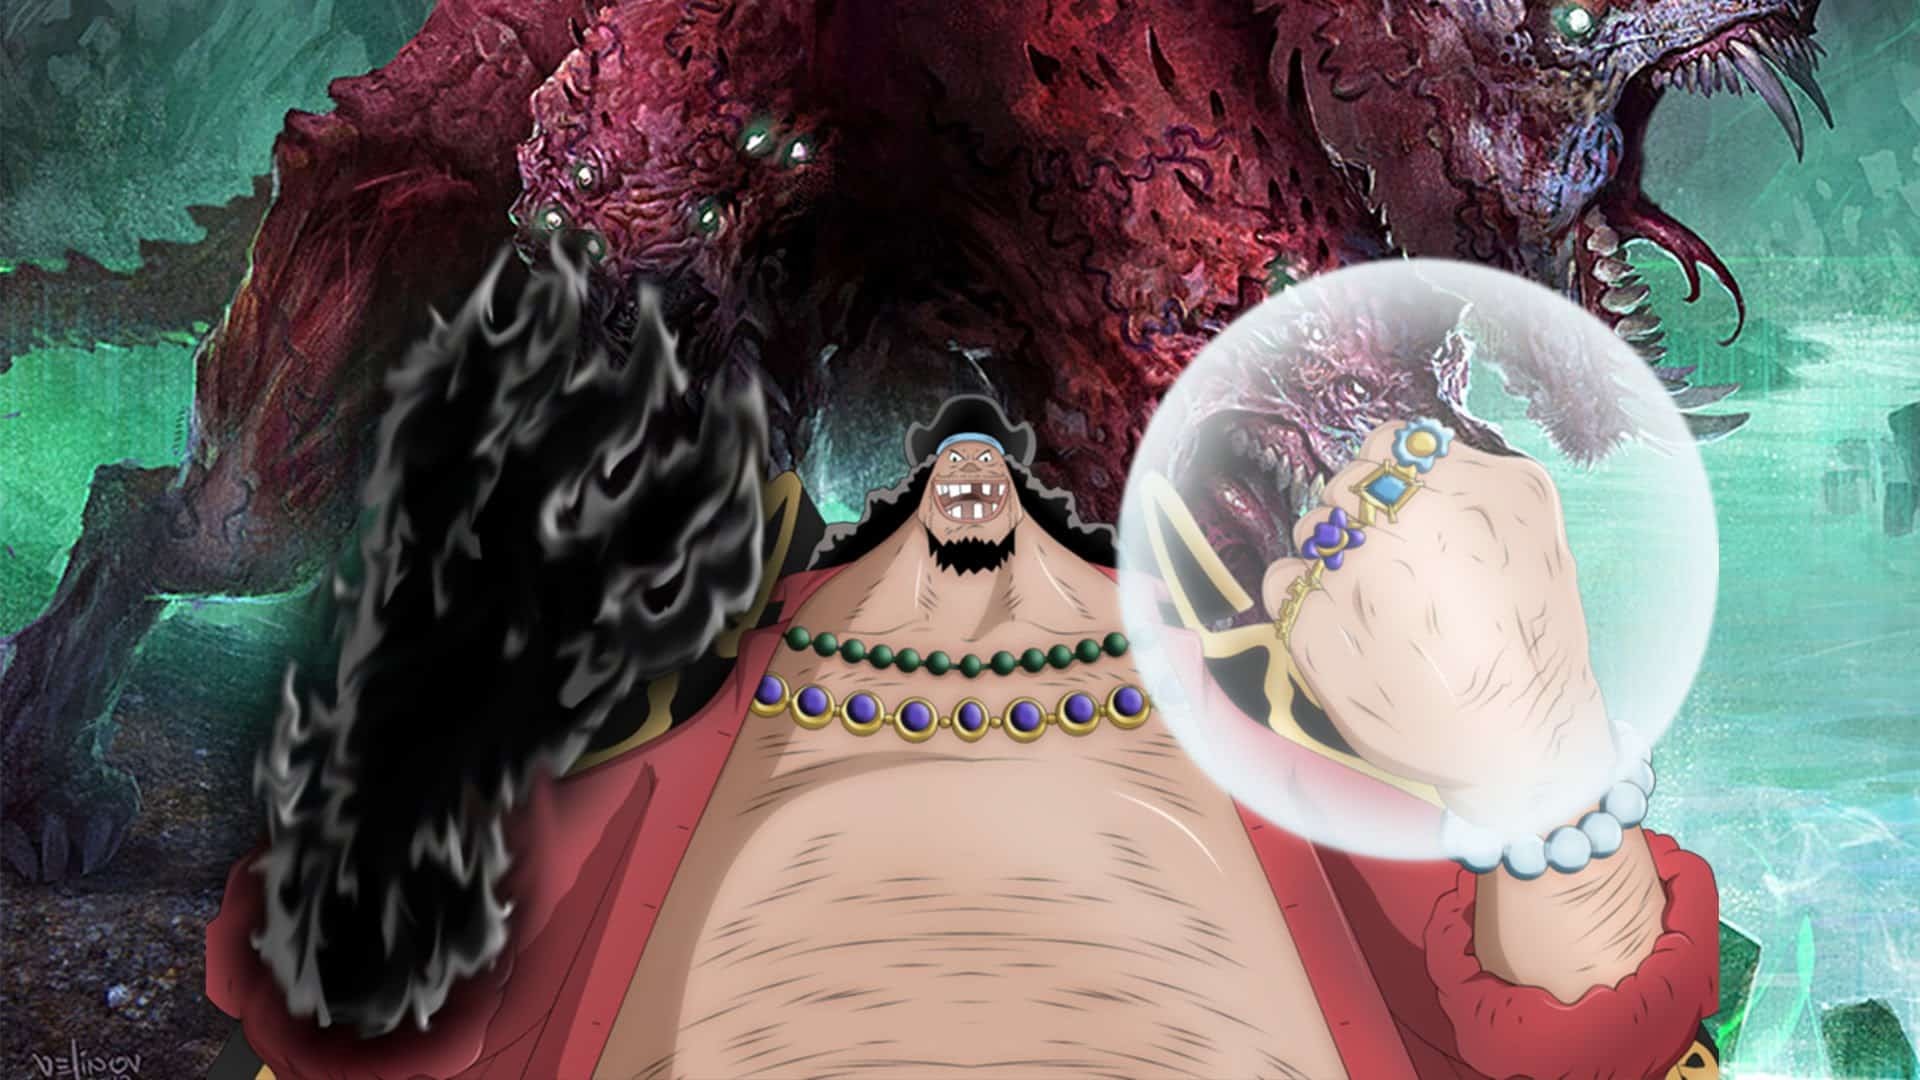 Is Kaido stronger than Luffy even at gear 5? - Quora